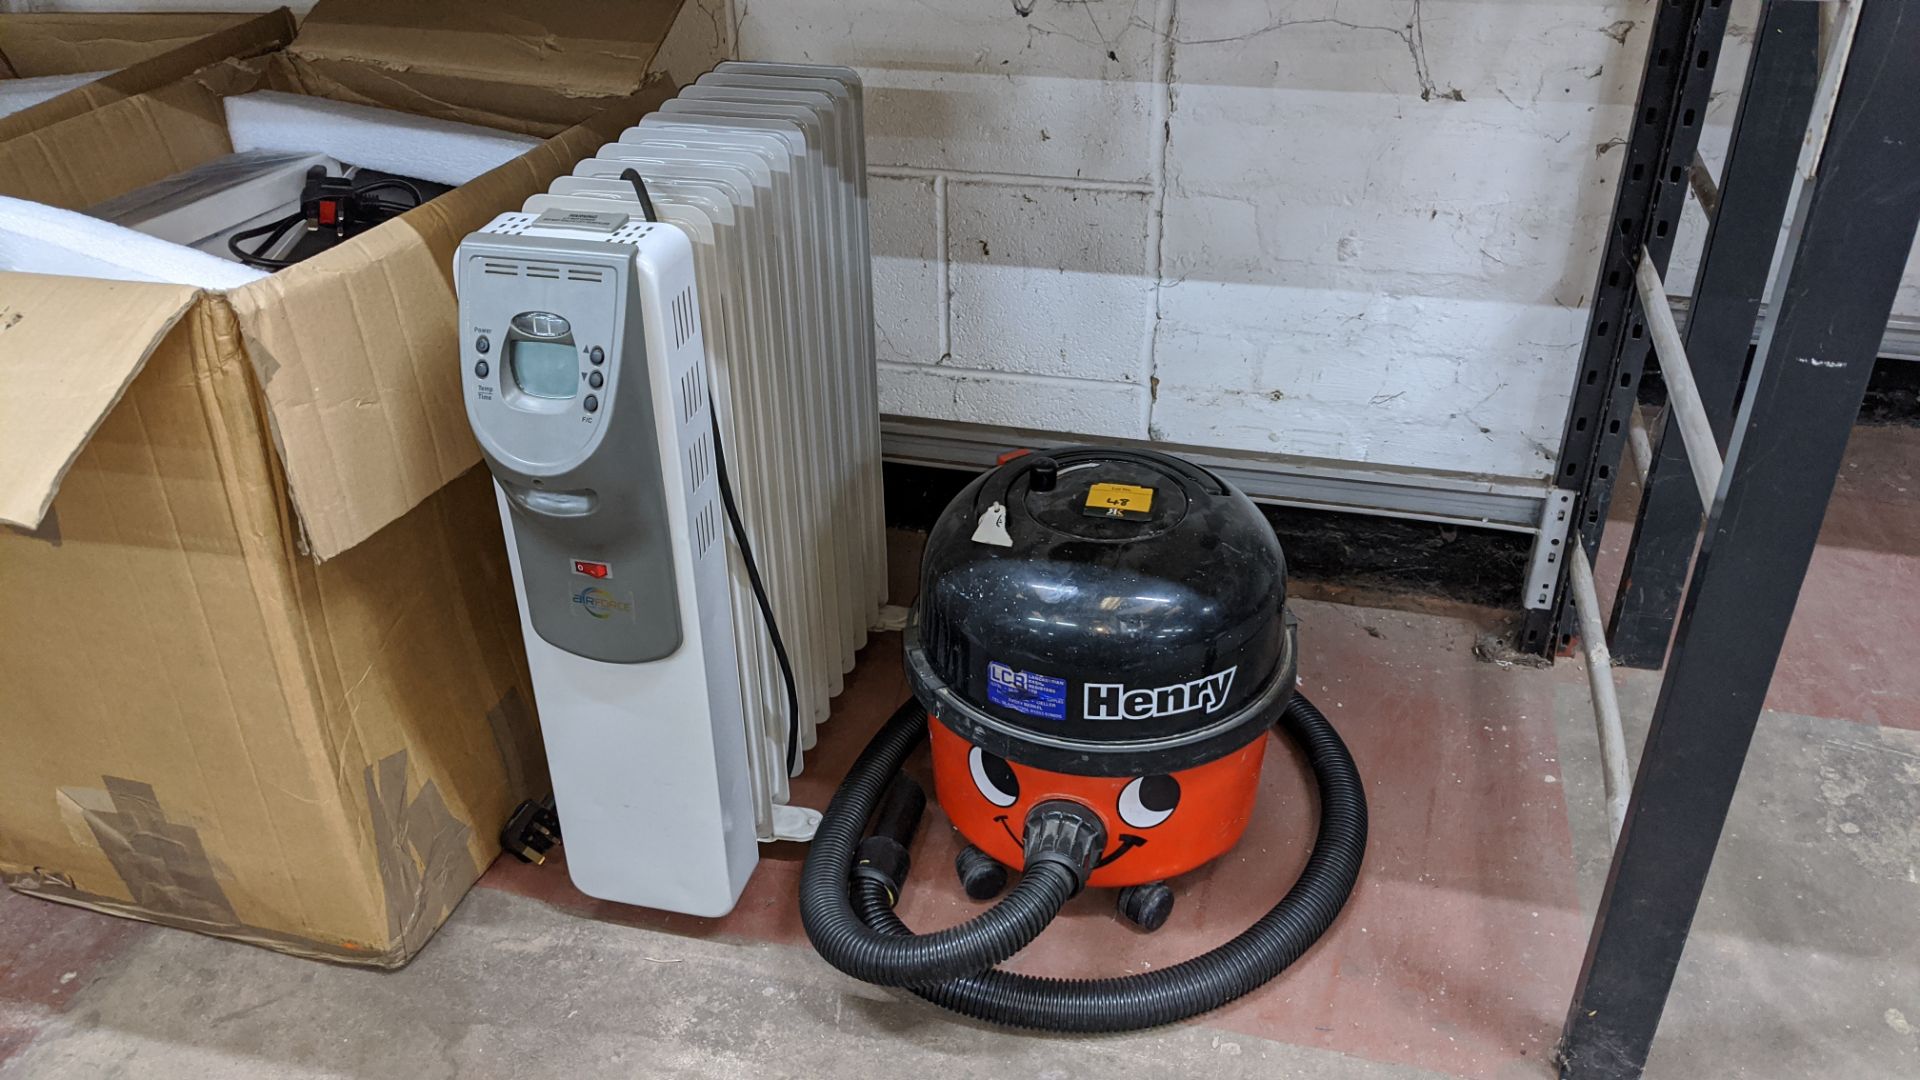 Appliance lot comprising Henry vacuum cleaner plus oil filled radiator Lots 35 - 49 consist of the - Image 2 of 3